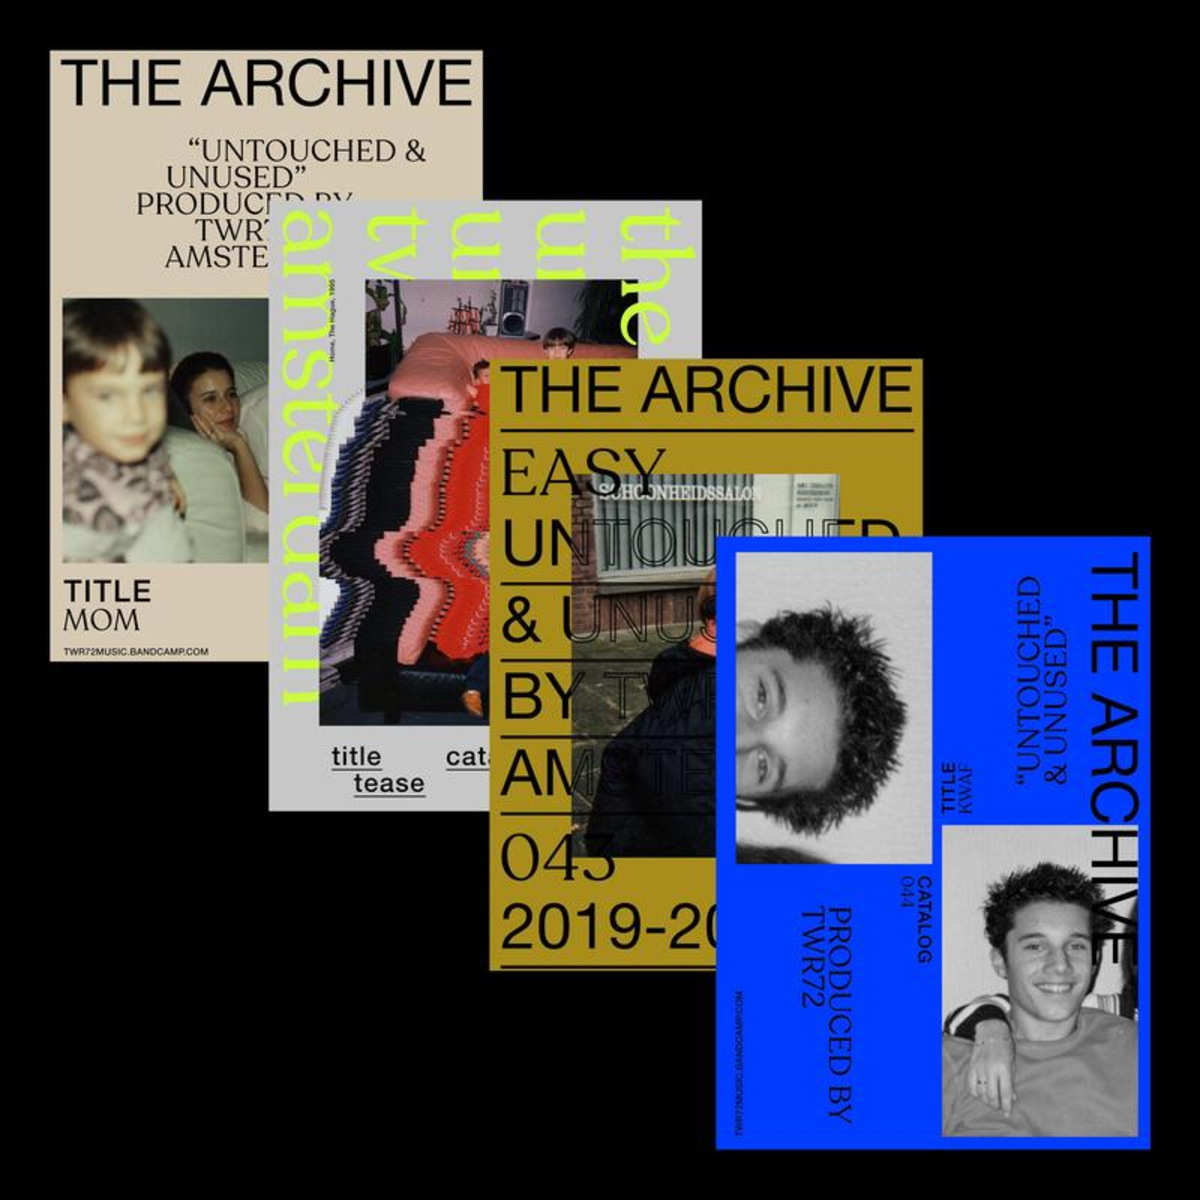 Download TWR72 - The Archive 11 on Electrobuzz